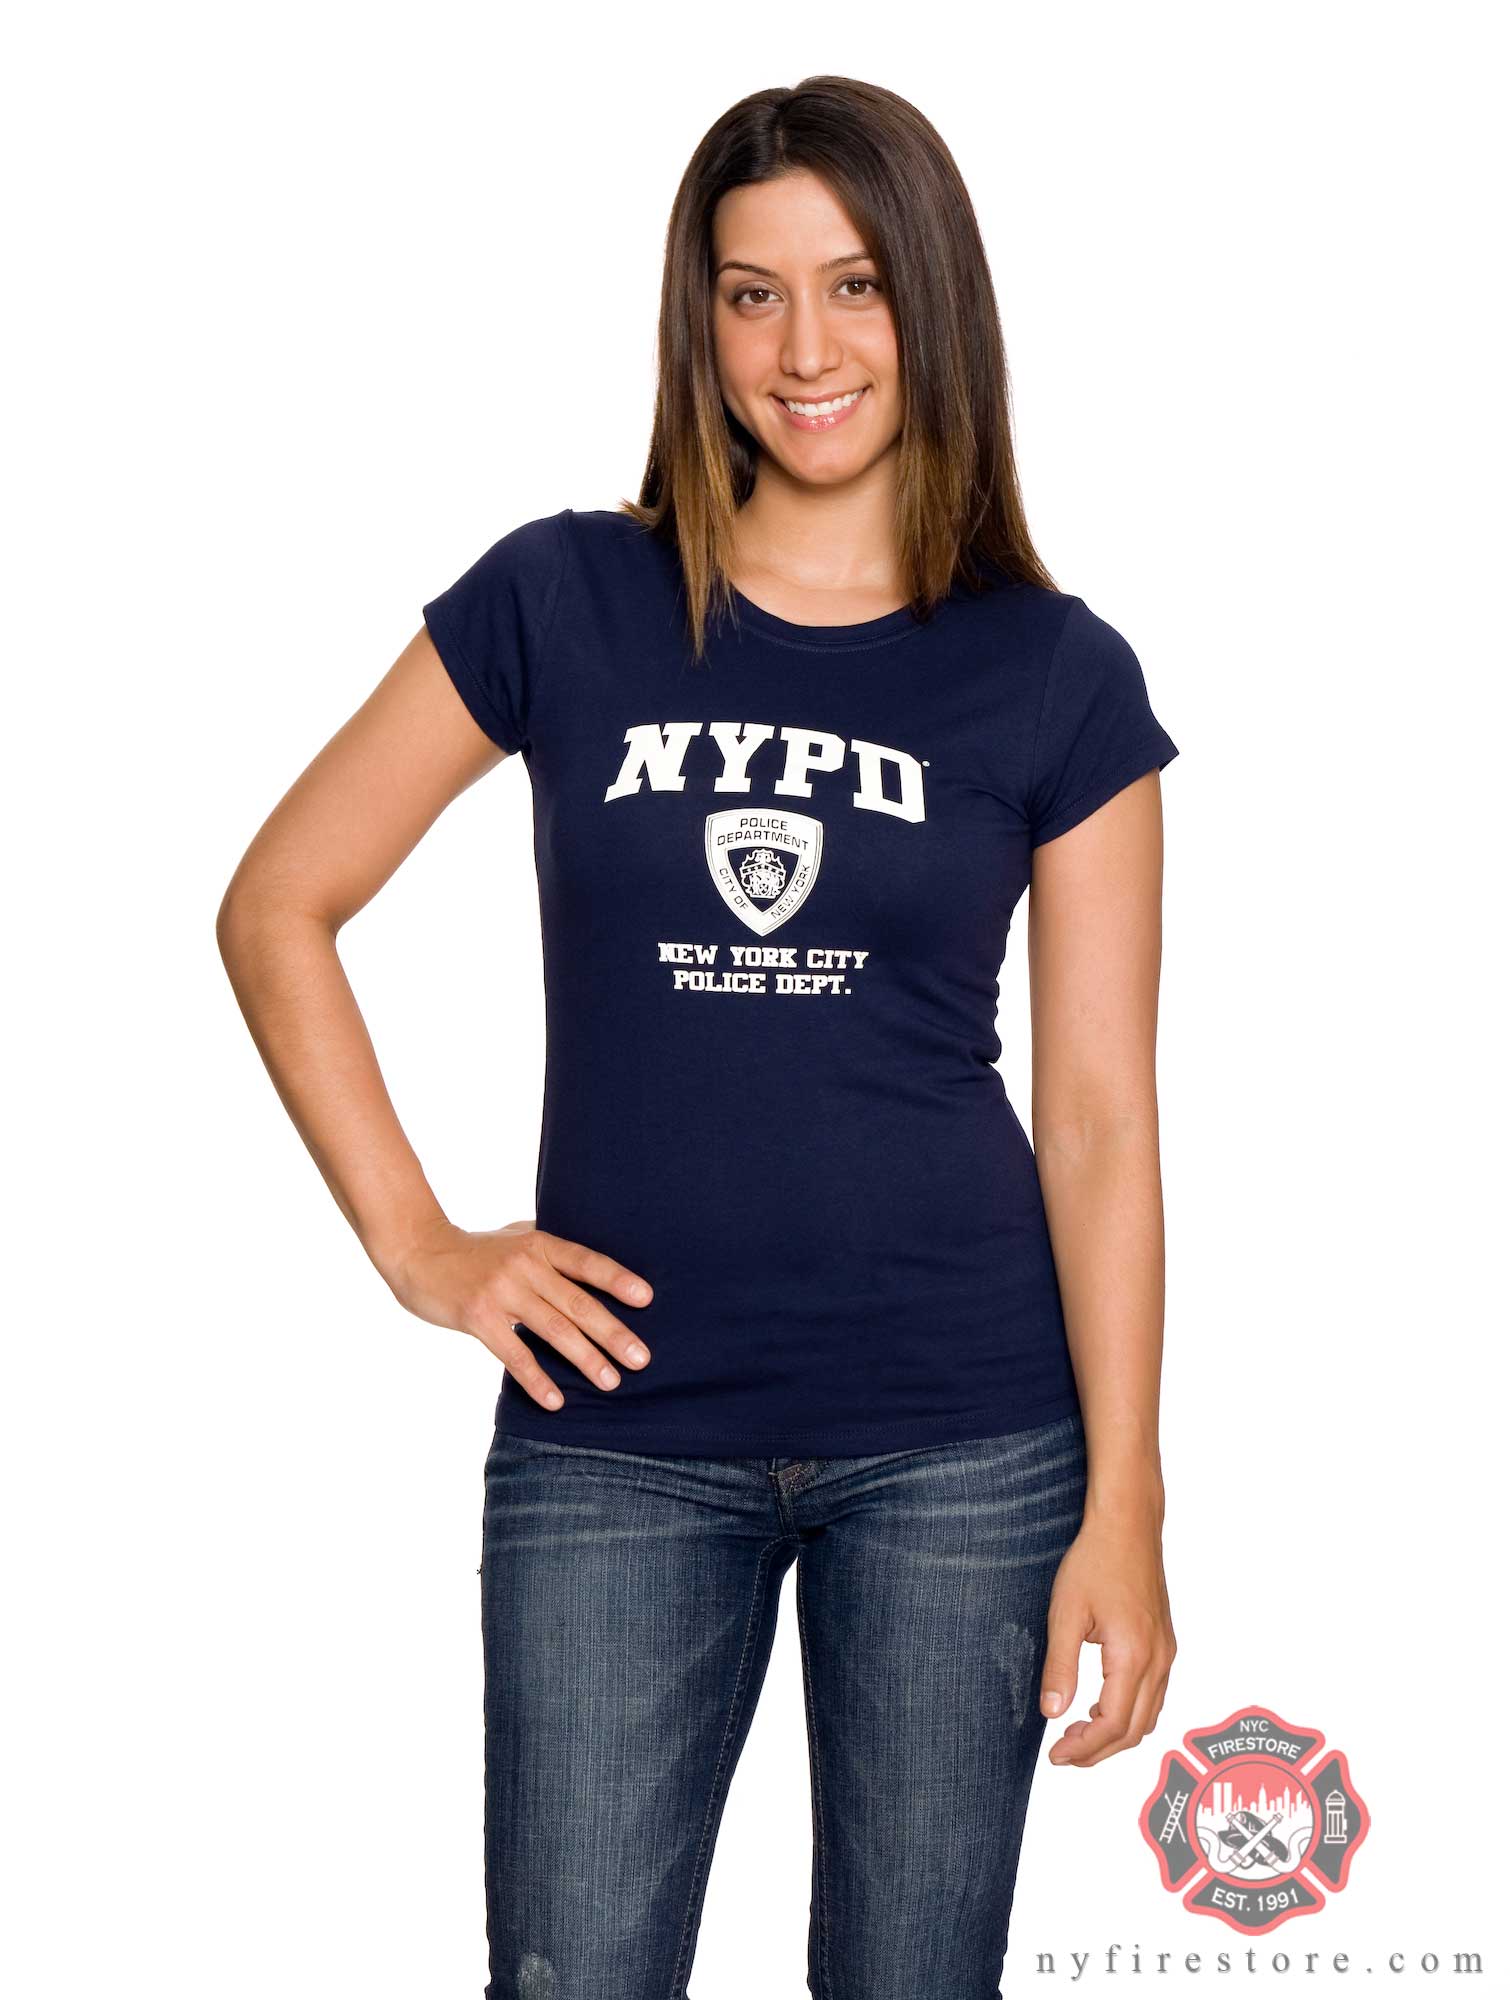 Women's Navy and Athletic T-Shirt